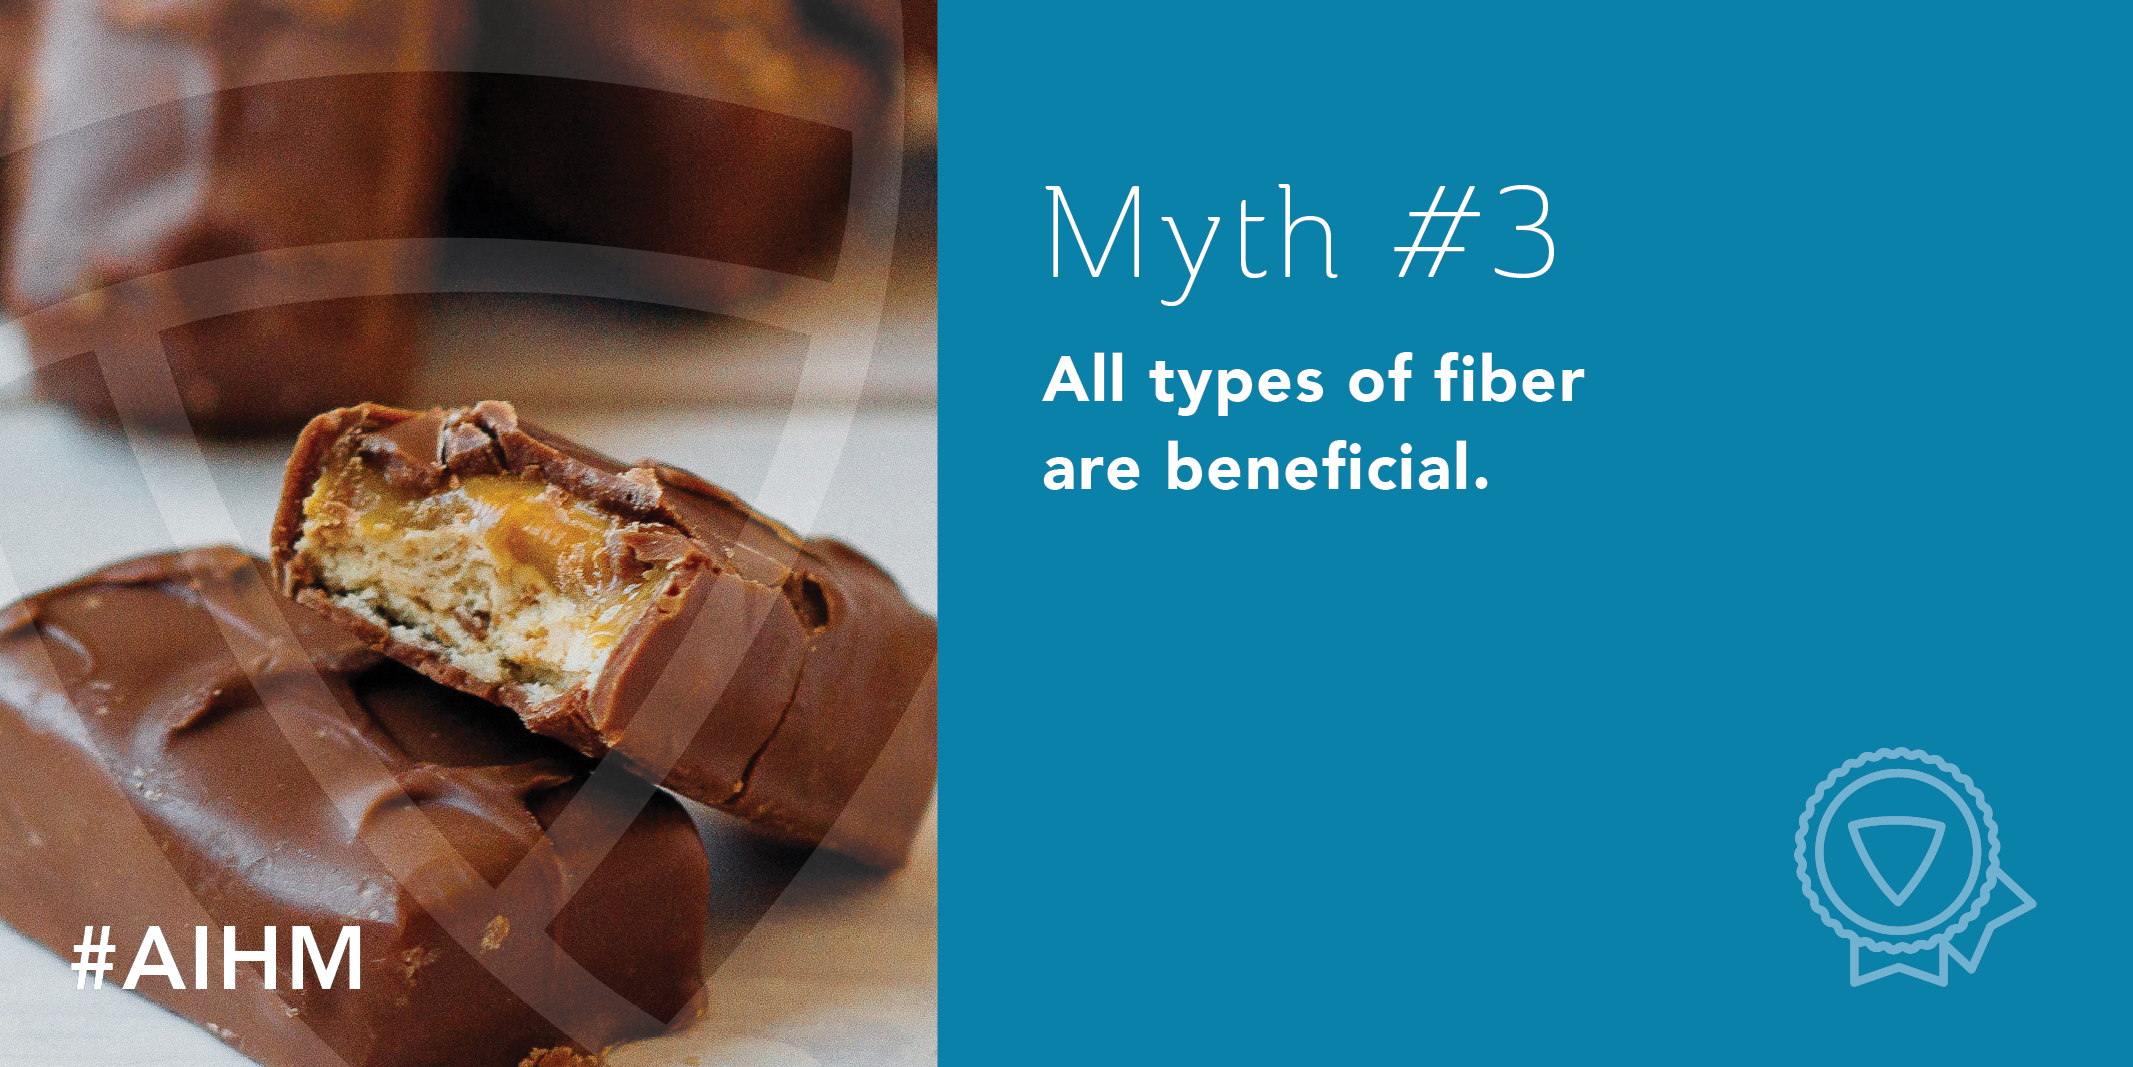 Myth #3: All types of fiber are beneficial.